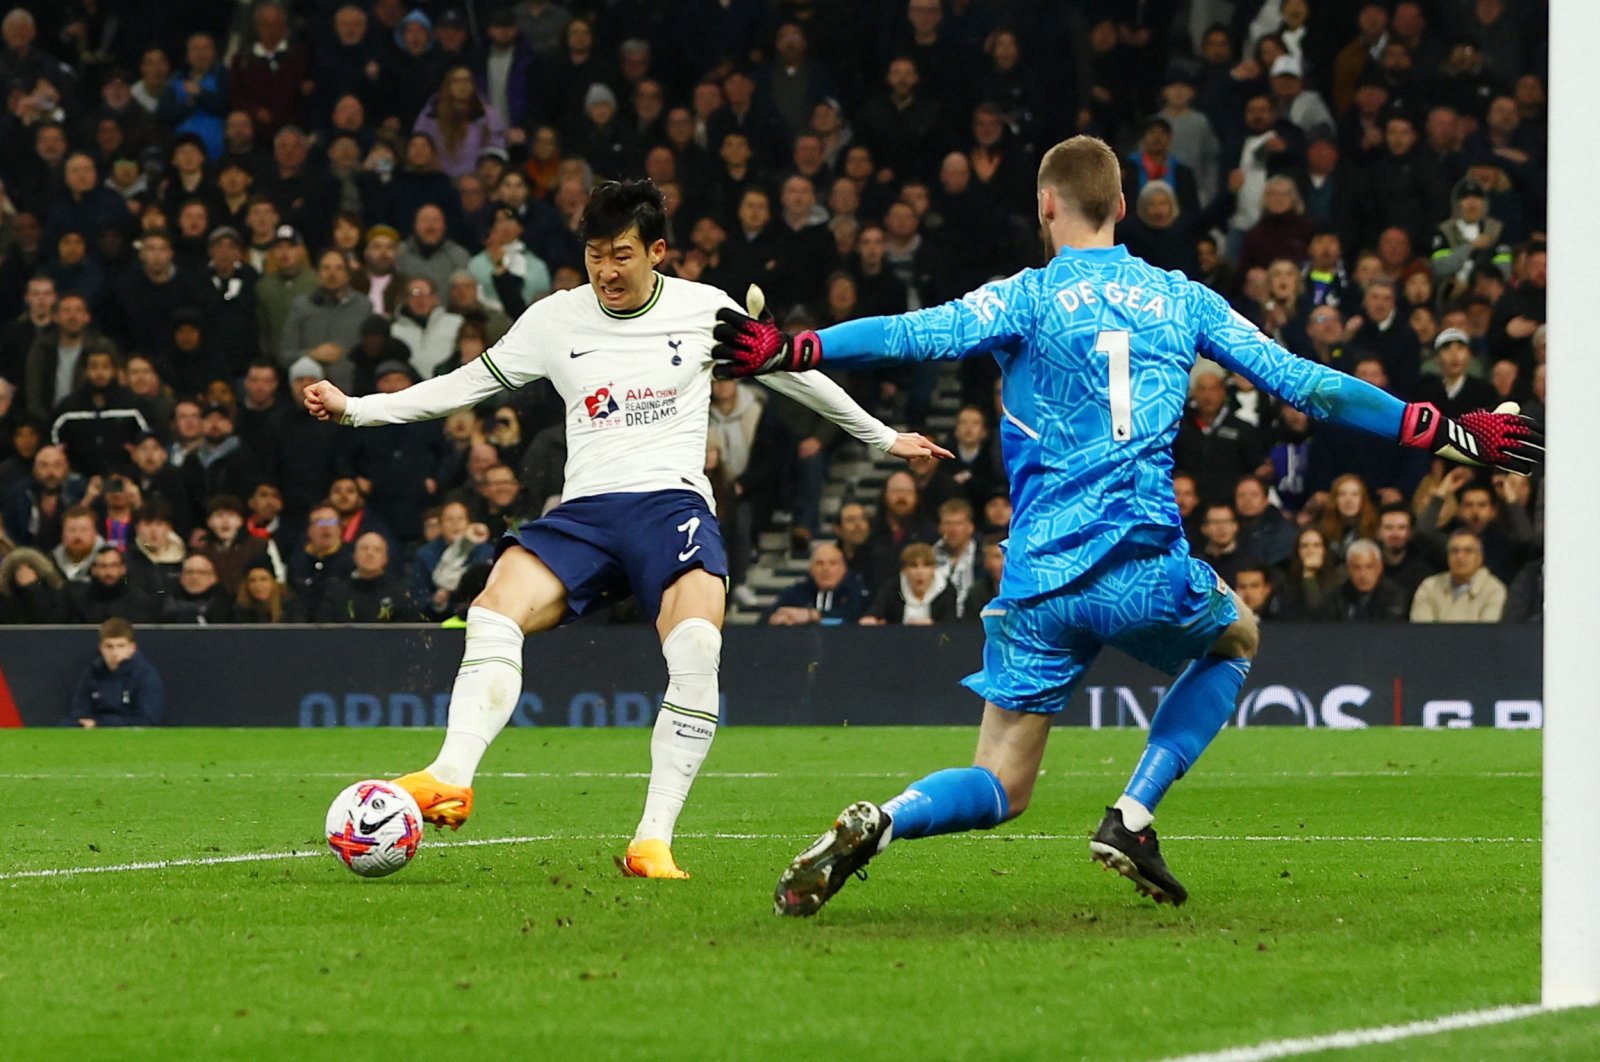 Spurs stage epic comeback to hold Man Utd 2-2 in thrilling tie